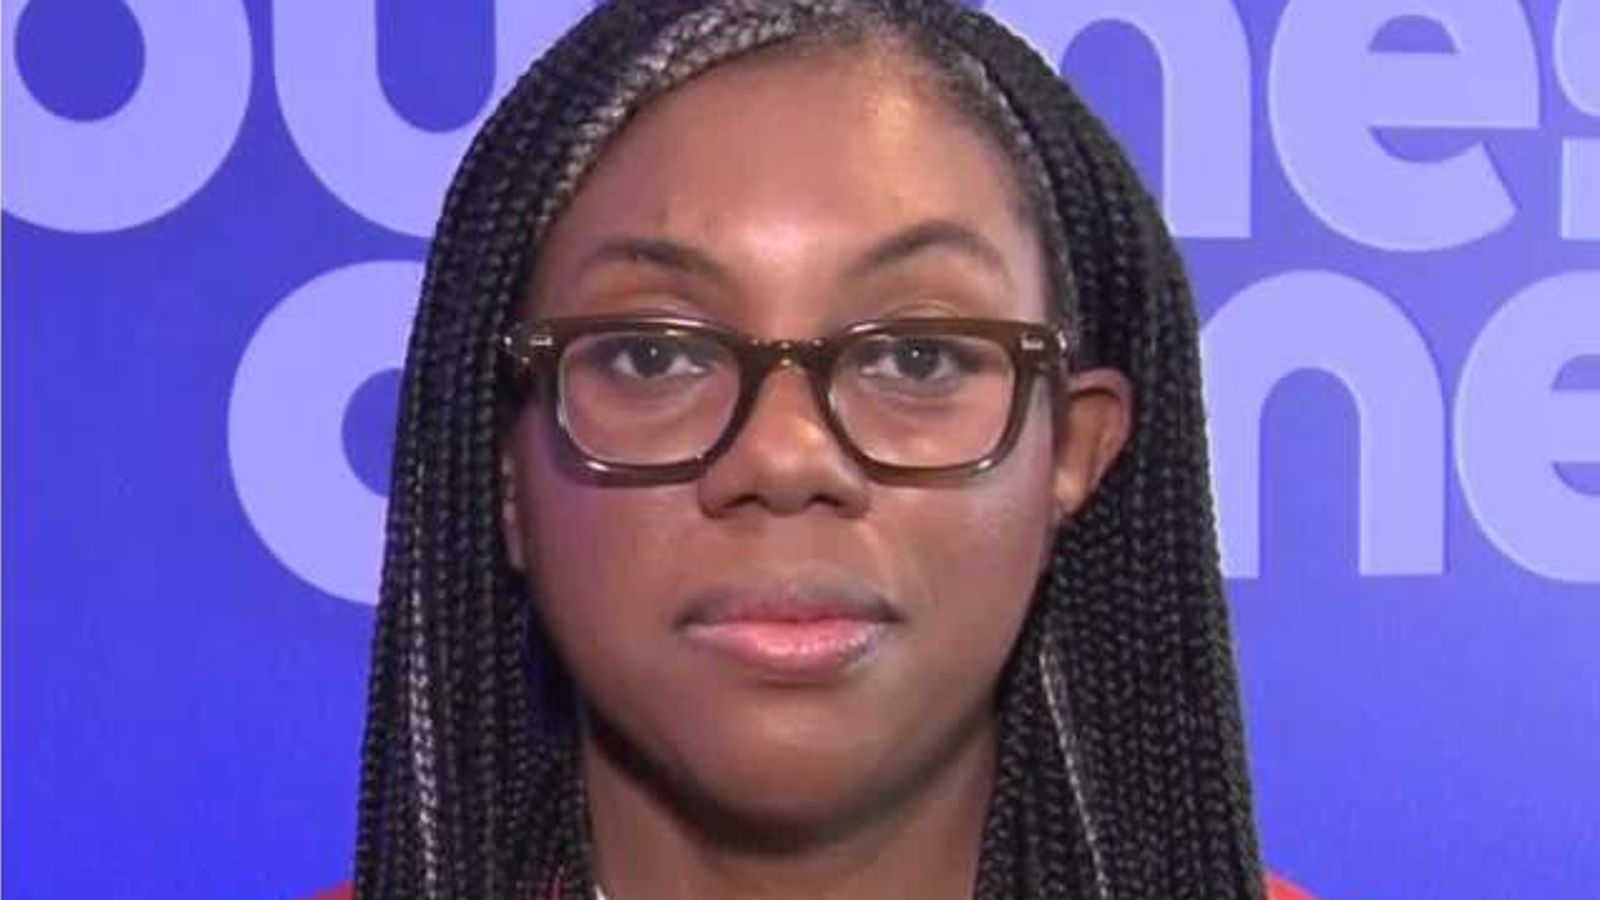 Tories 'have drawn a line' under Frank Hester race row and should keep donations, Kemi Badenoch says